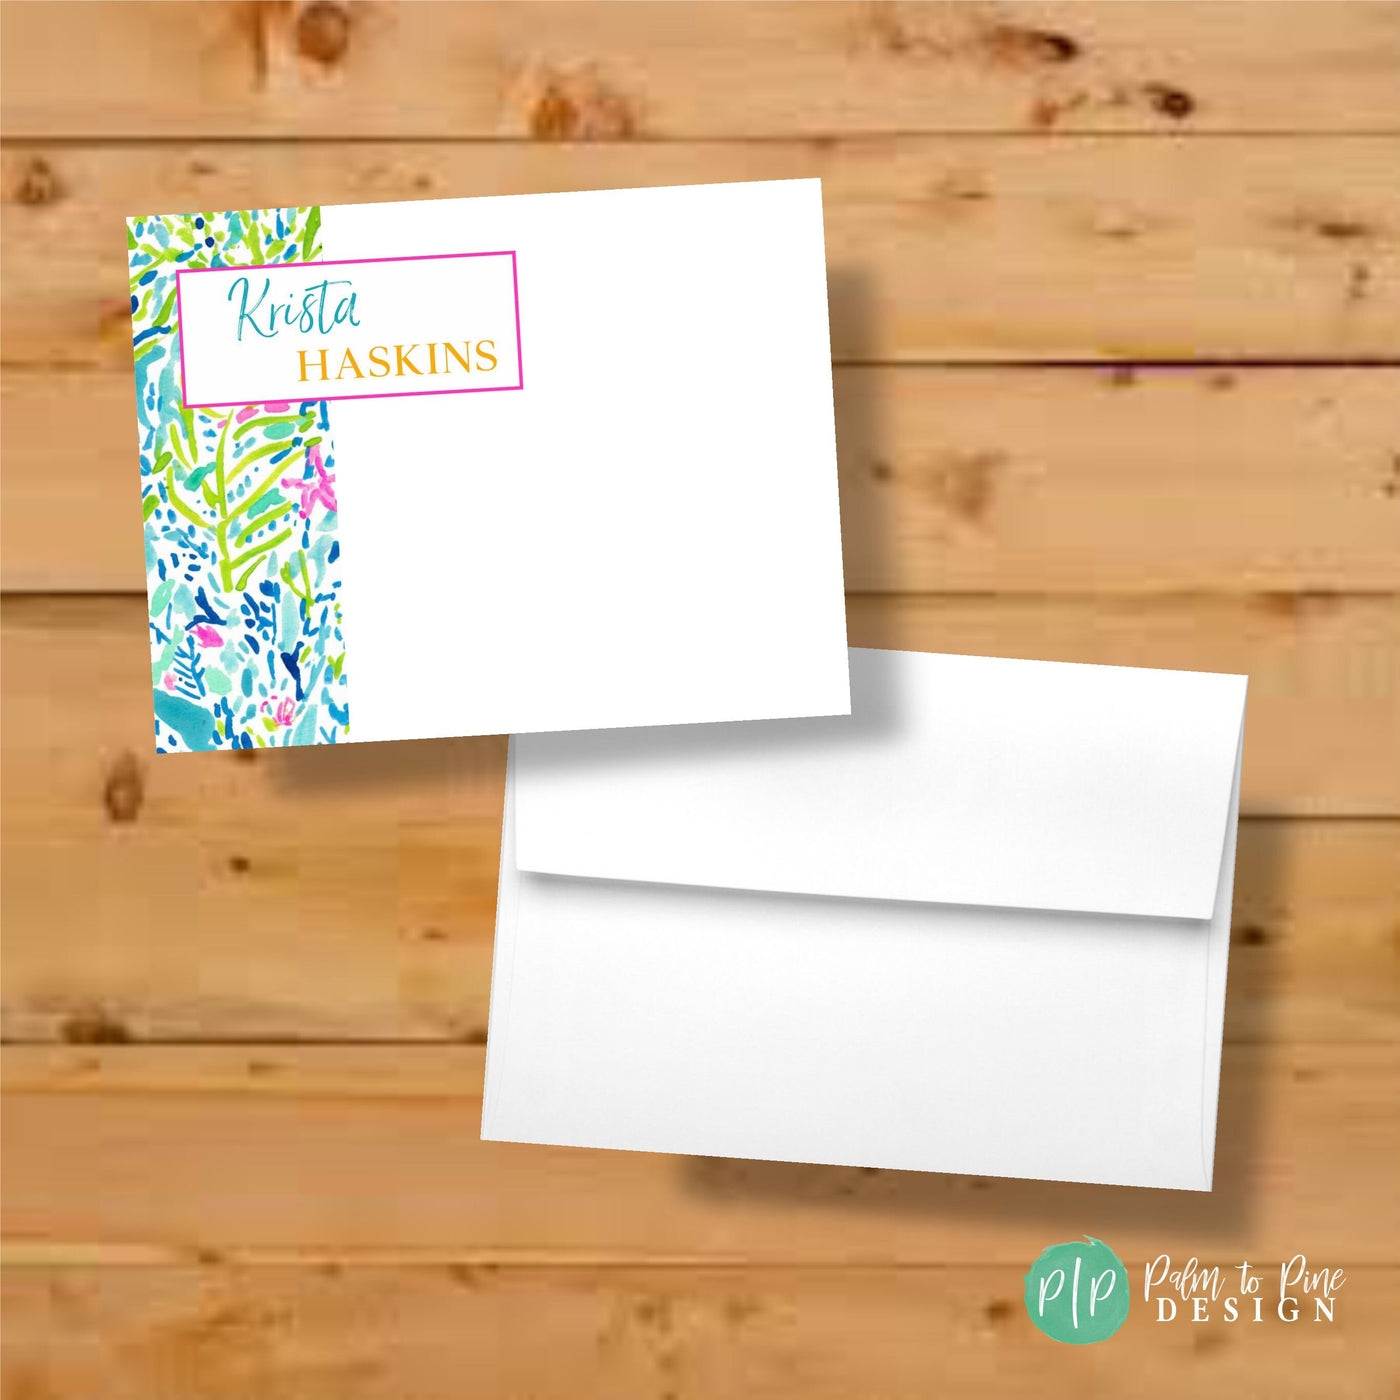 Personalized Stationary, Stationary Cards, Teacher Gift, Stationary Personalized, Stationary Set, Personalized Cards, Personalized Note Card